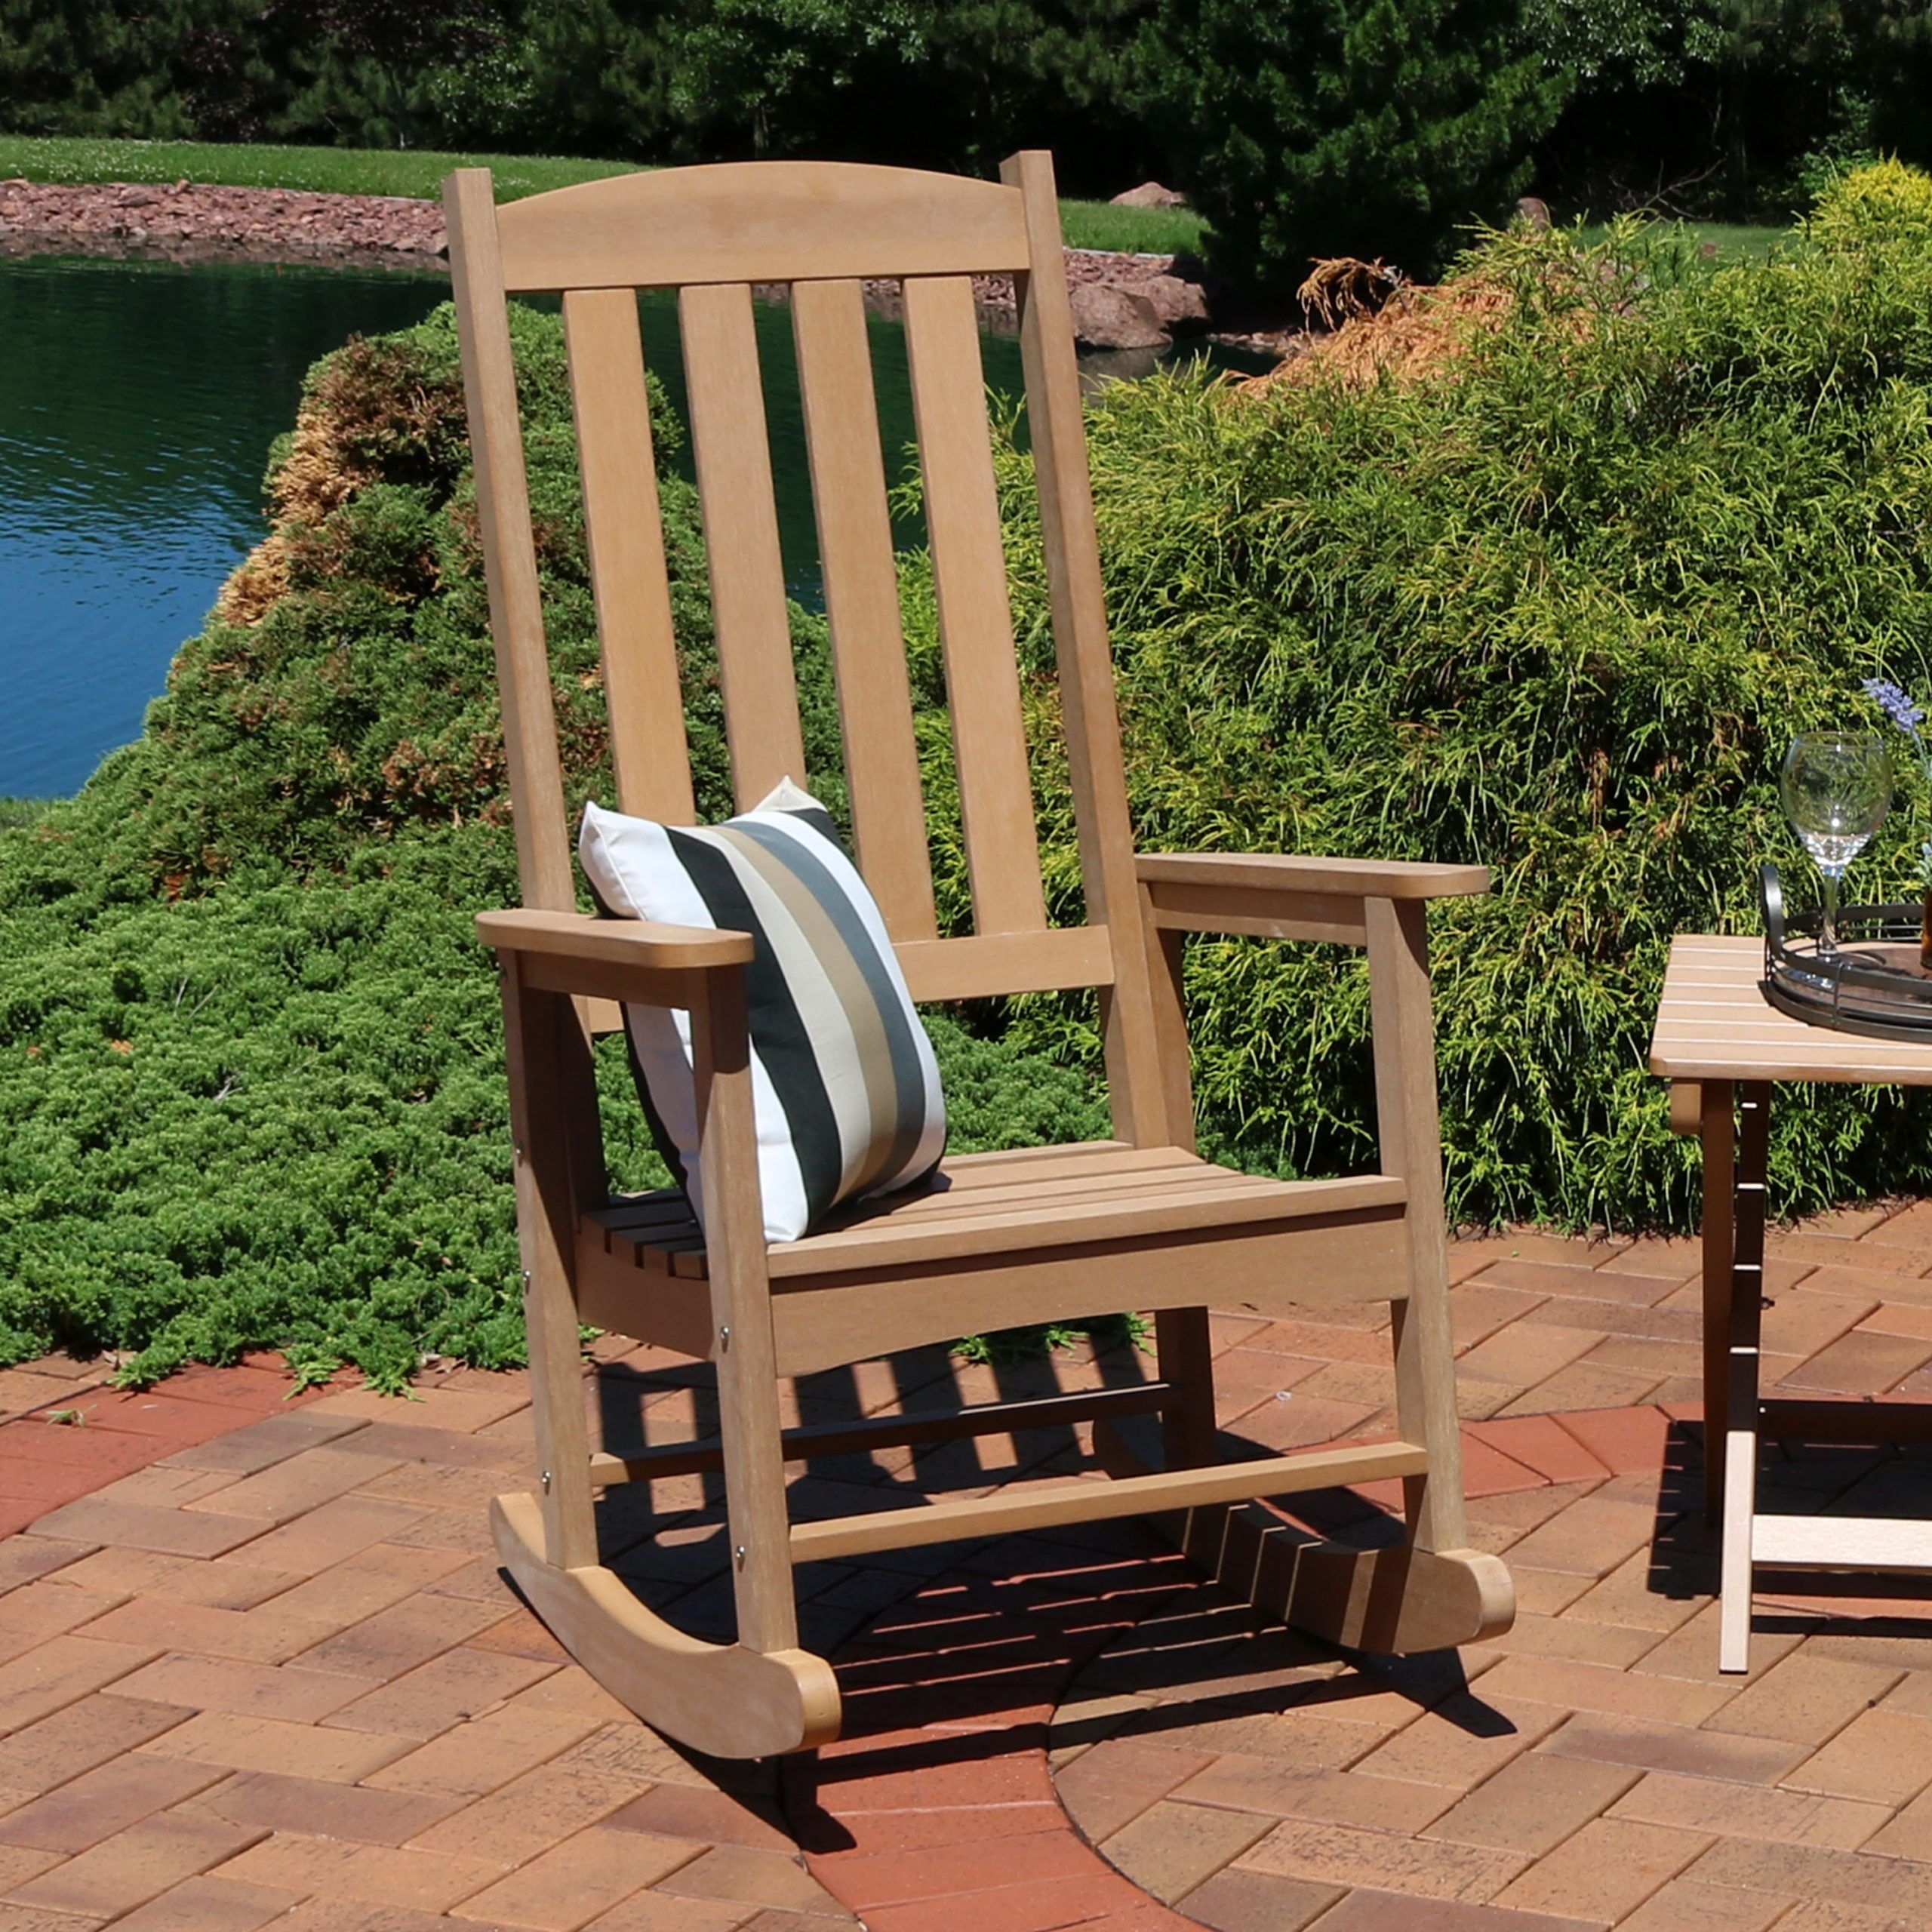 Sunnydaze All Weather Rocking Chair With Faux Wood Design, Multiple Intended For Wood Outdoor Armchair Sets (View 11 of 15)